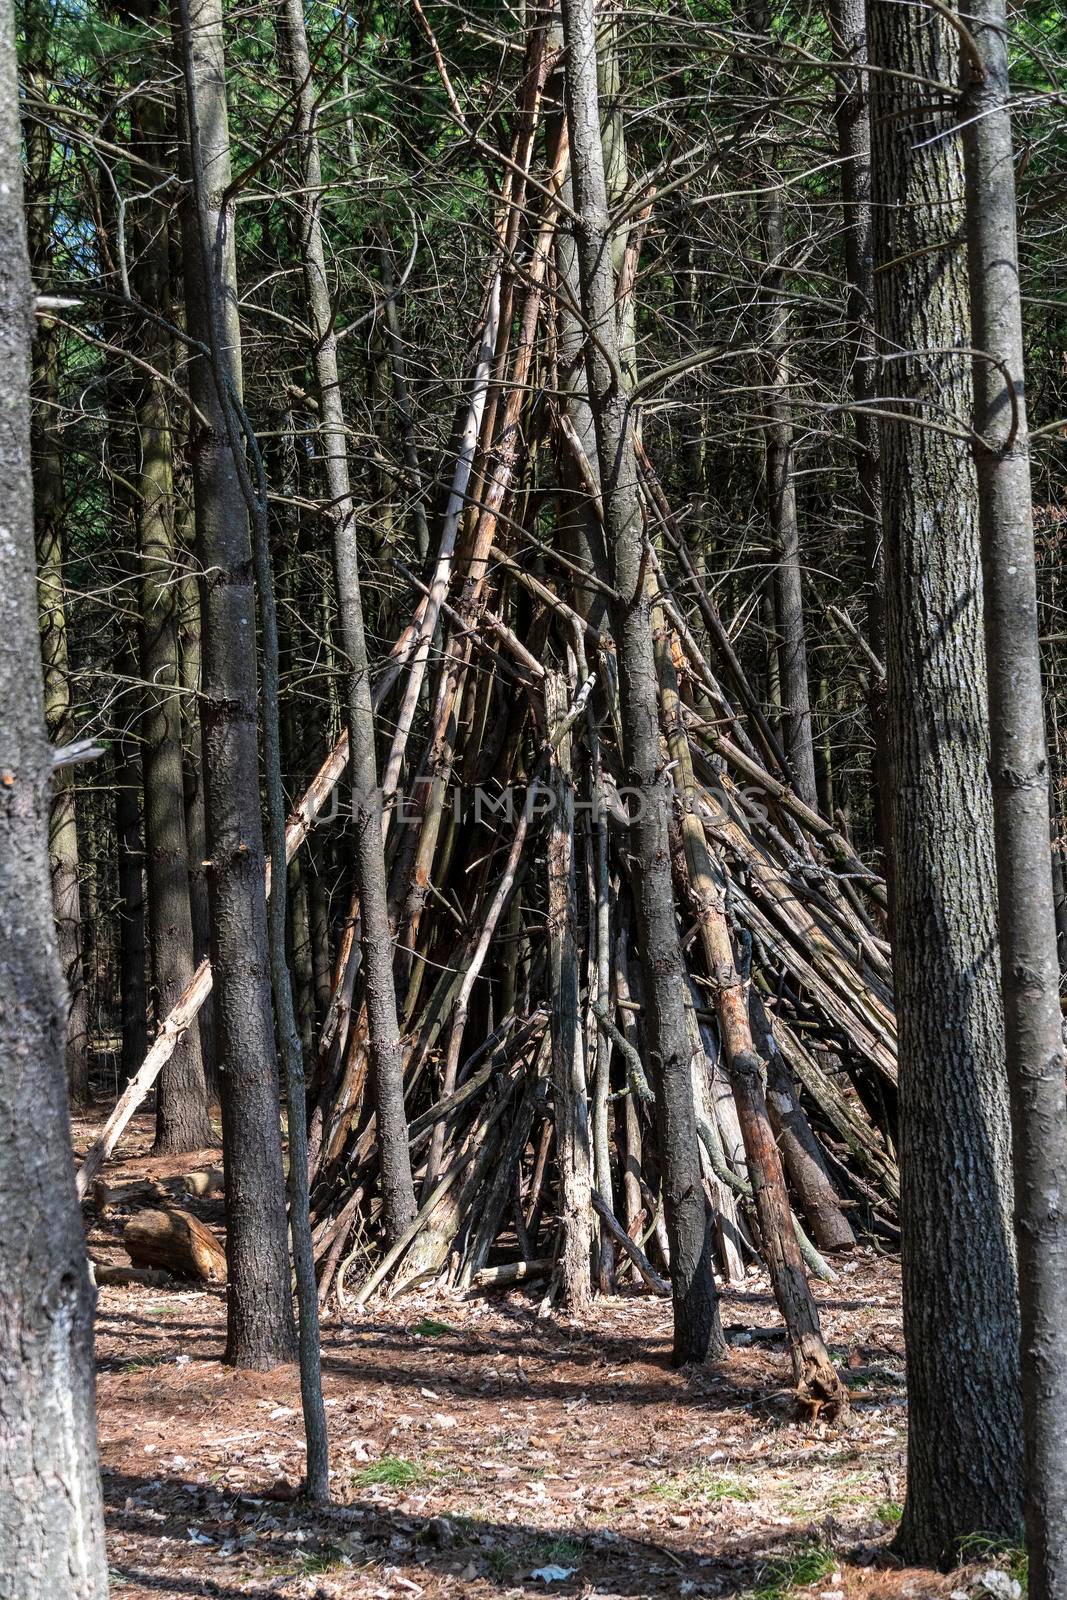 Deadwood folded in a pyramid in the Canadian forest by ben44